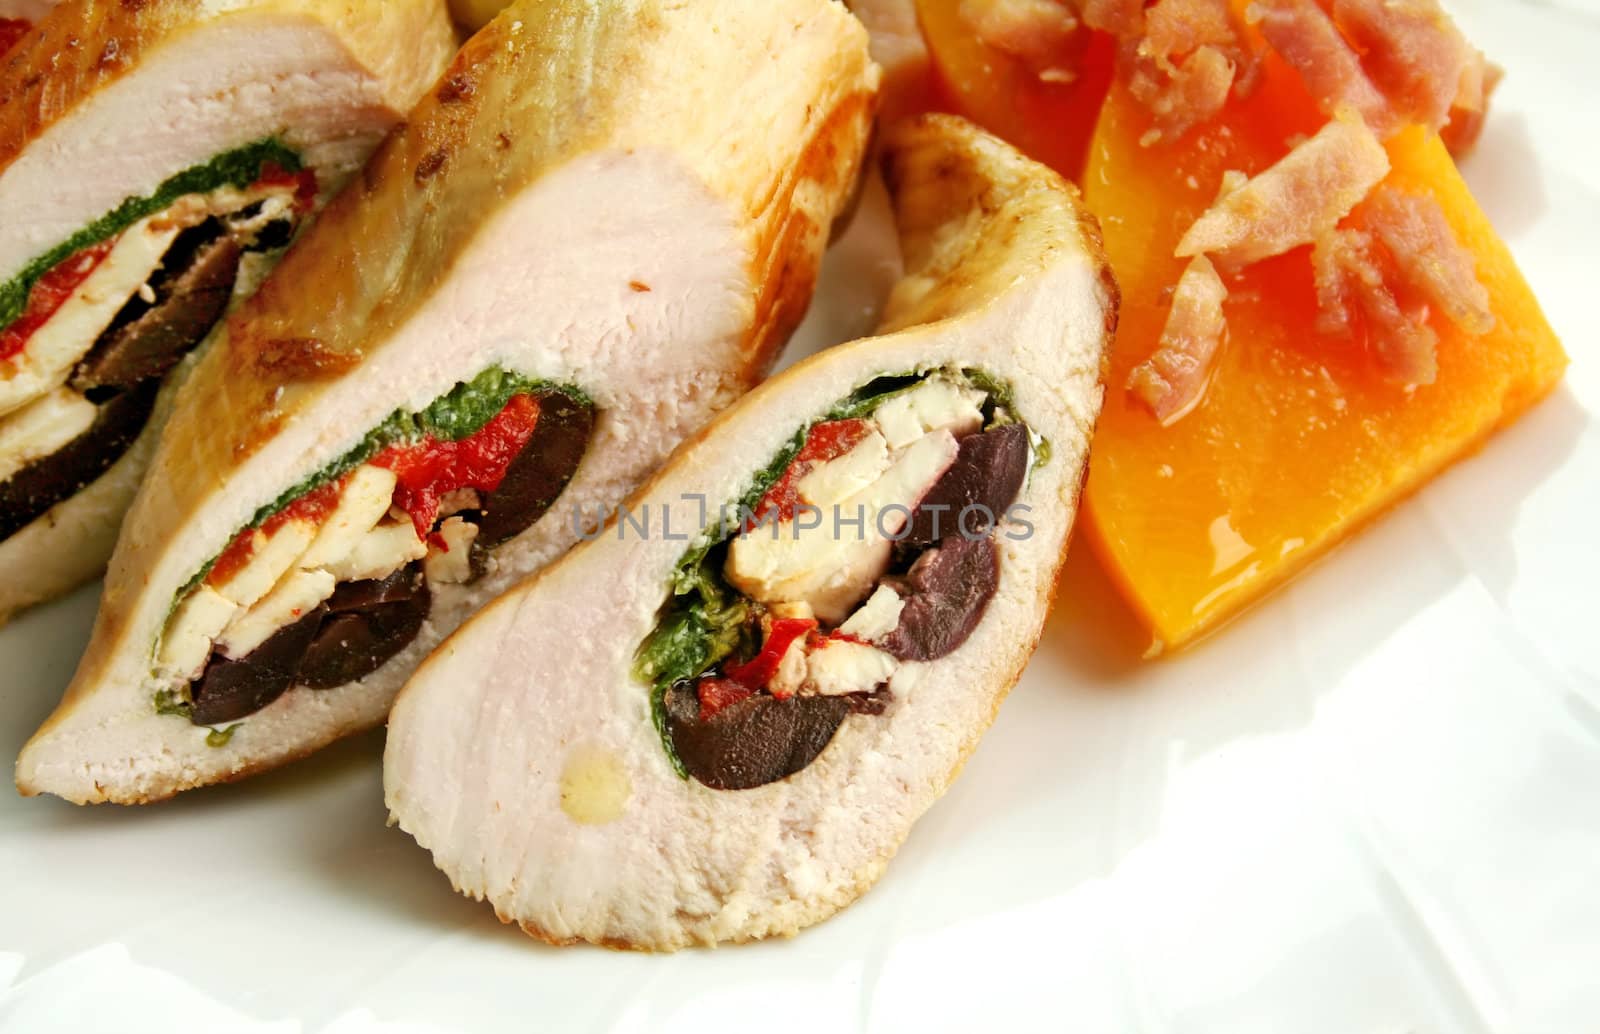 Chicken stuffed with a Mediterranean filling made of spinach, fetta, peppers and olives with vegetables.